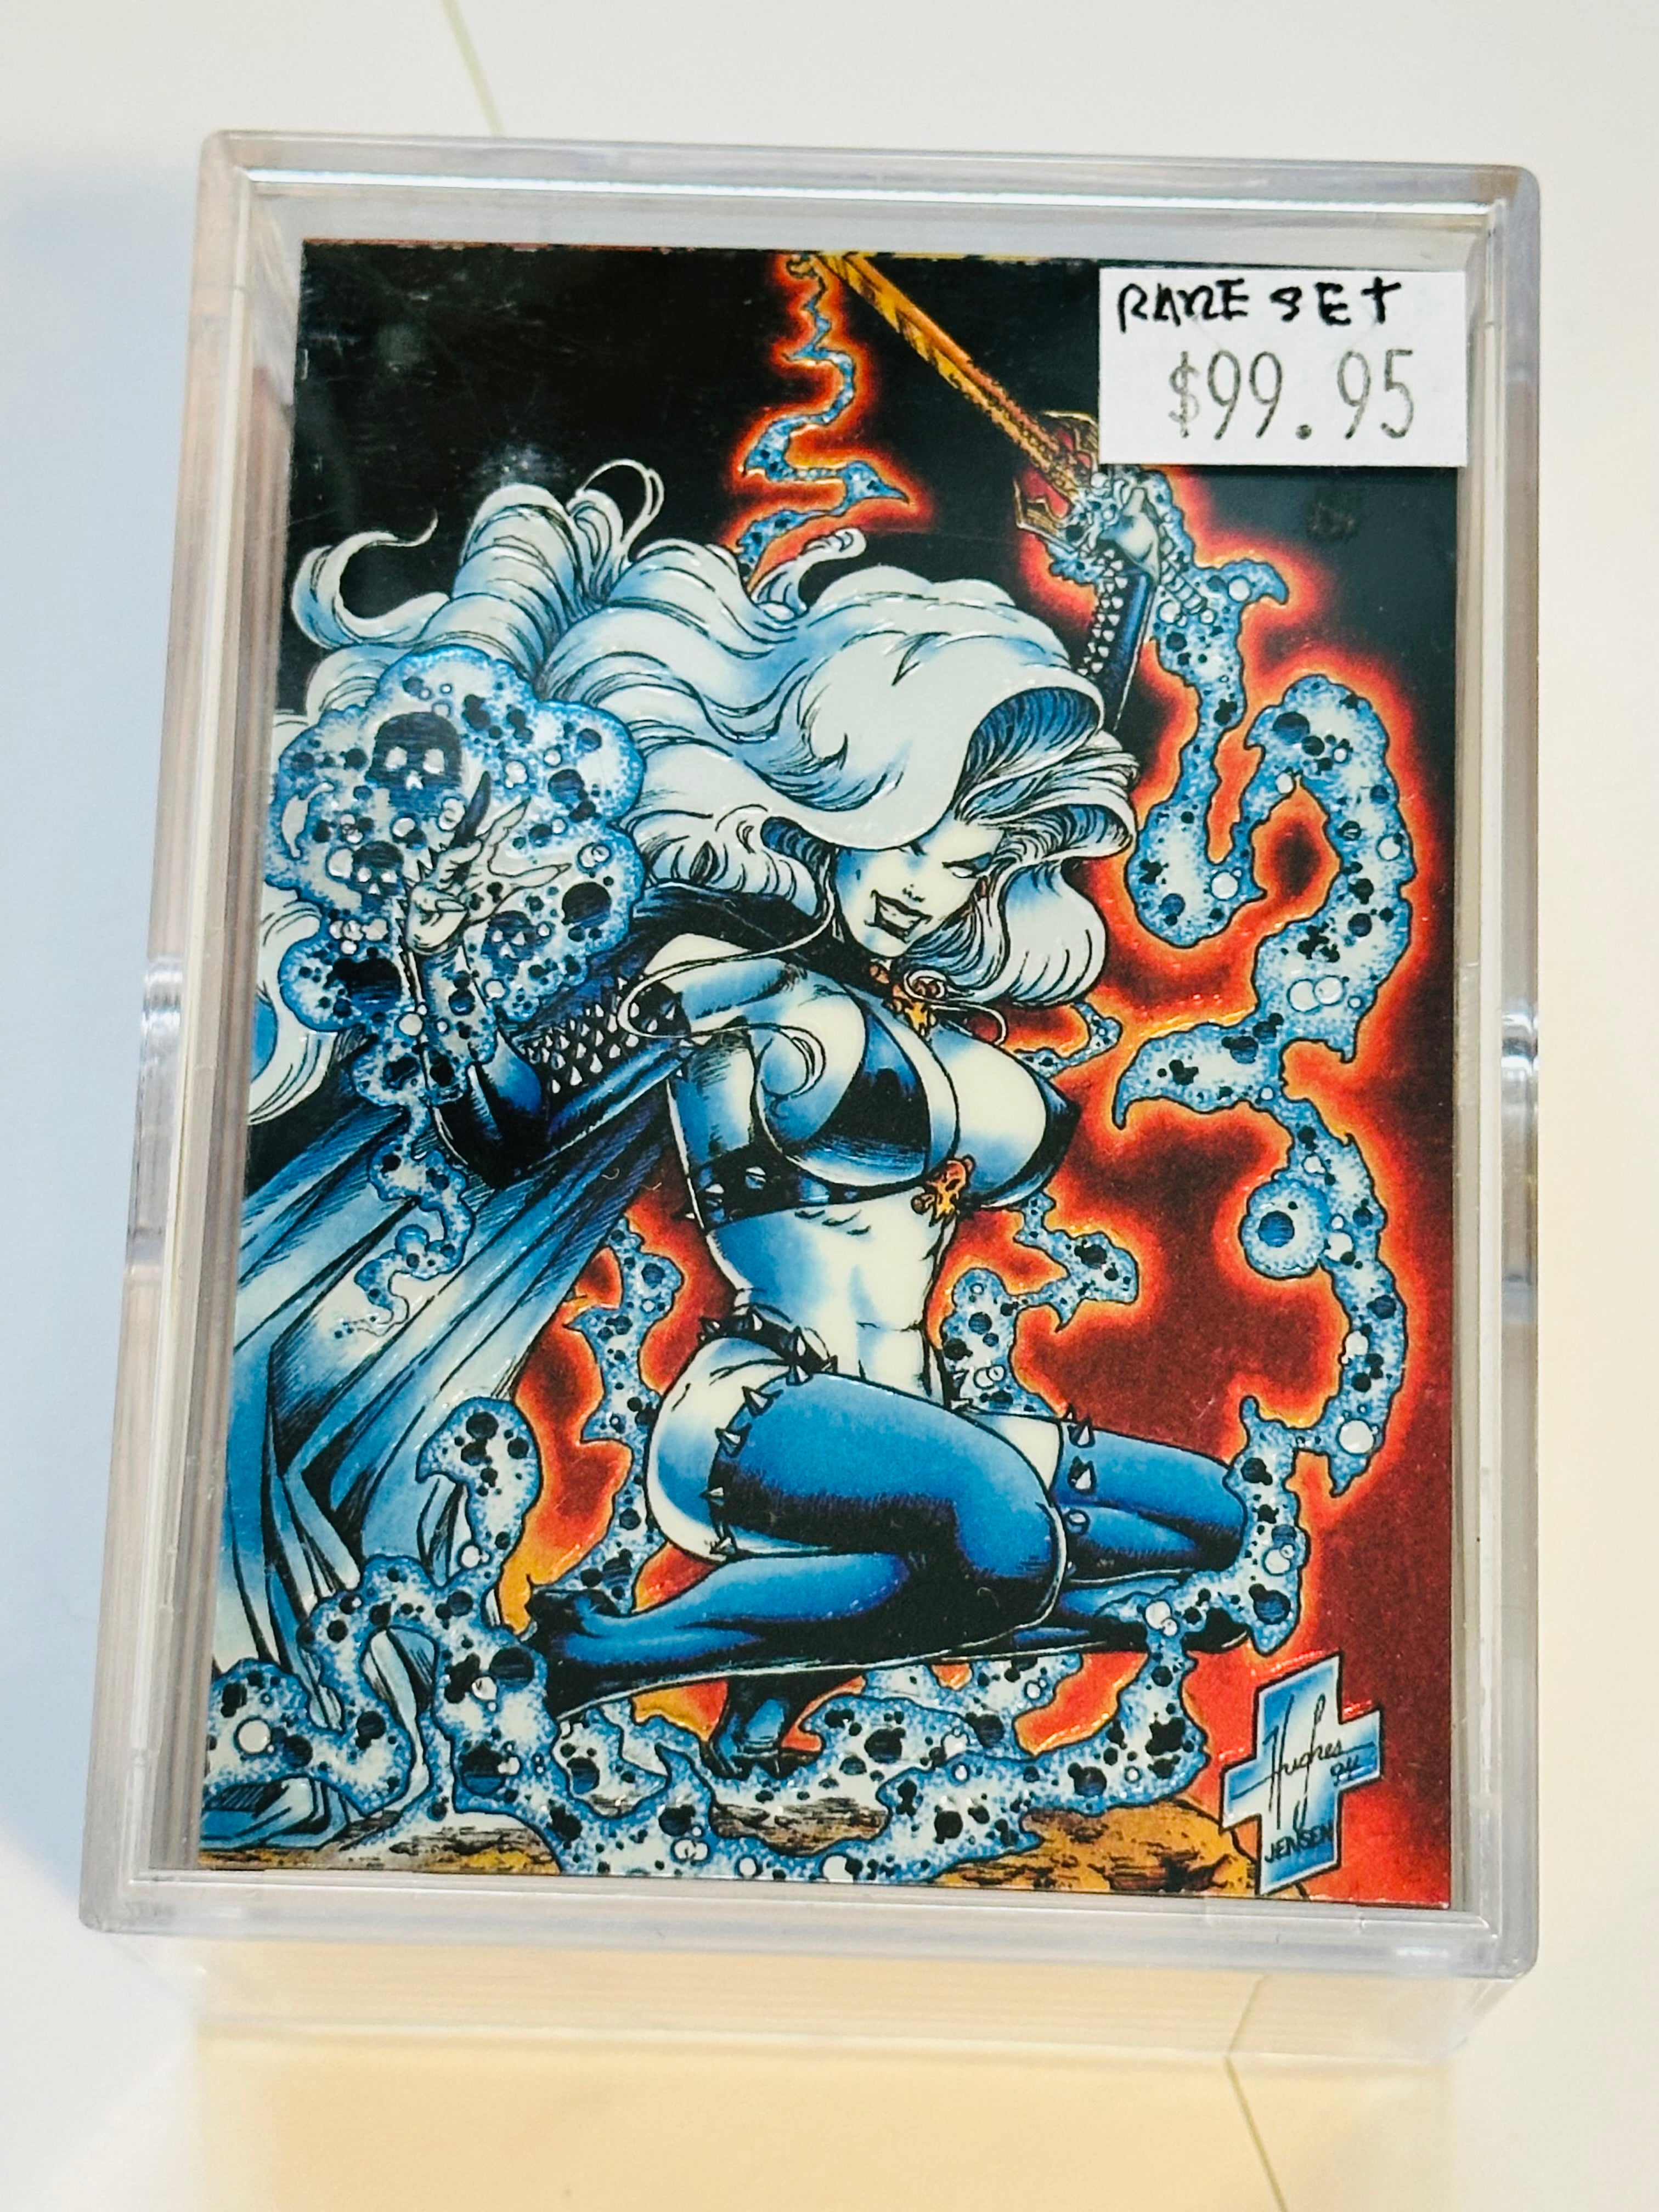 Lady death series, one high-grade condition all chromium card set 1994